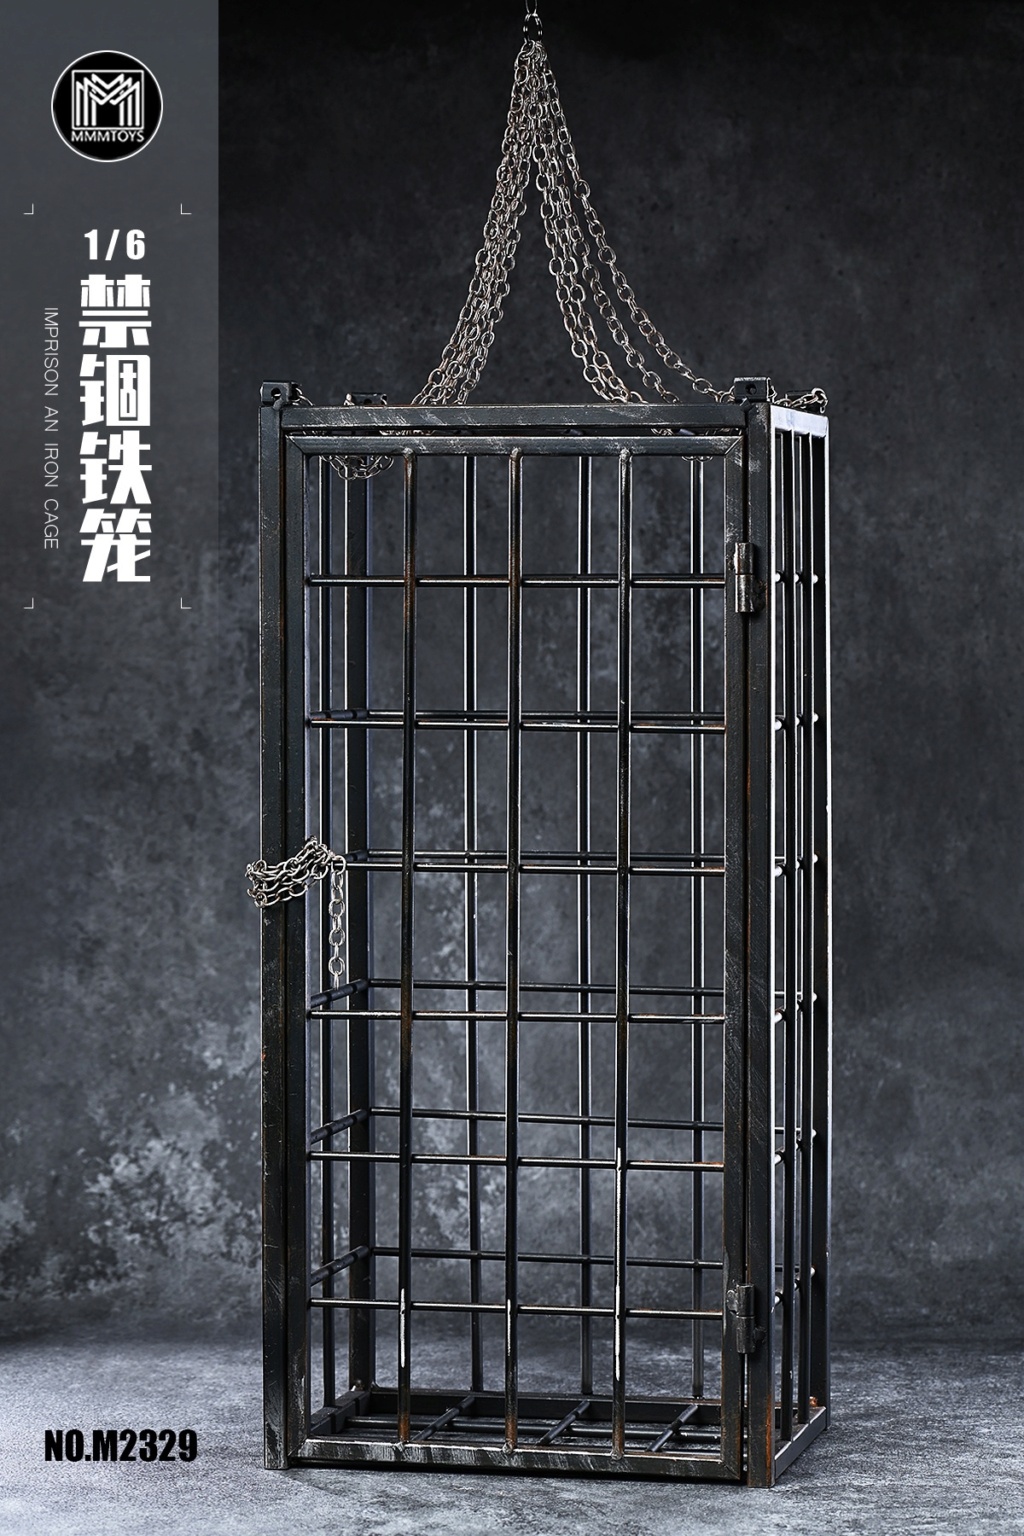 NEW PRODUCT: MMMToys: 1/6 Imprisoned iron cage M2329  15304412